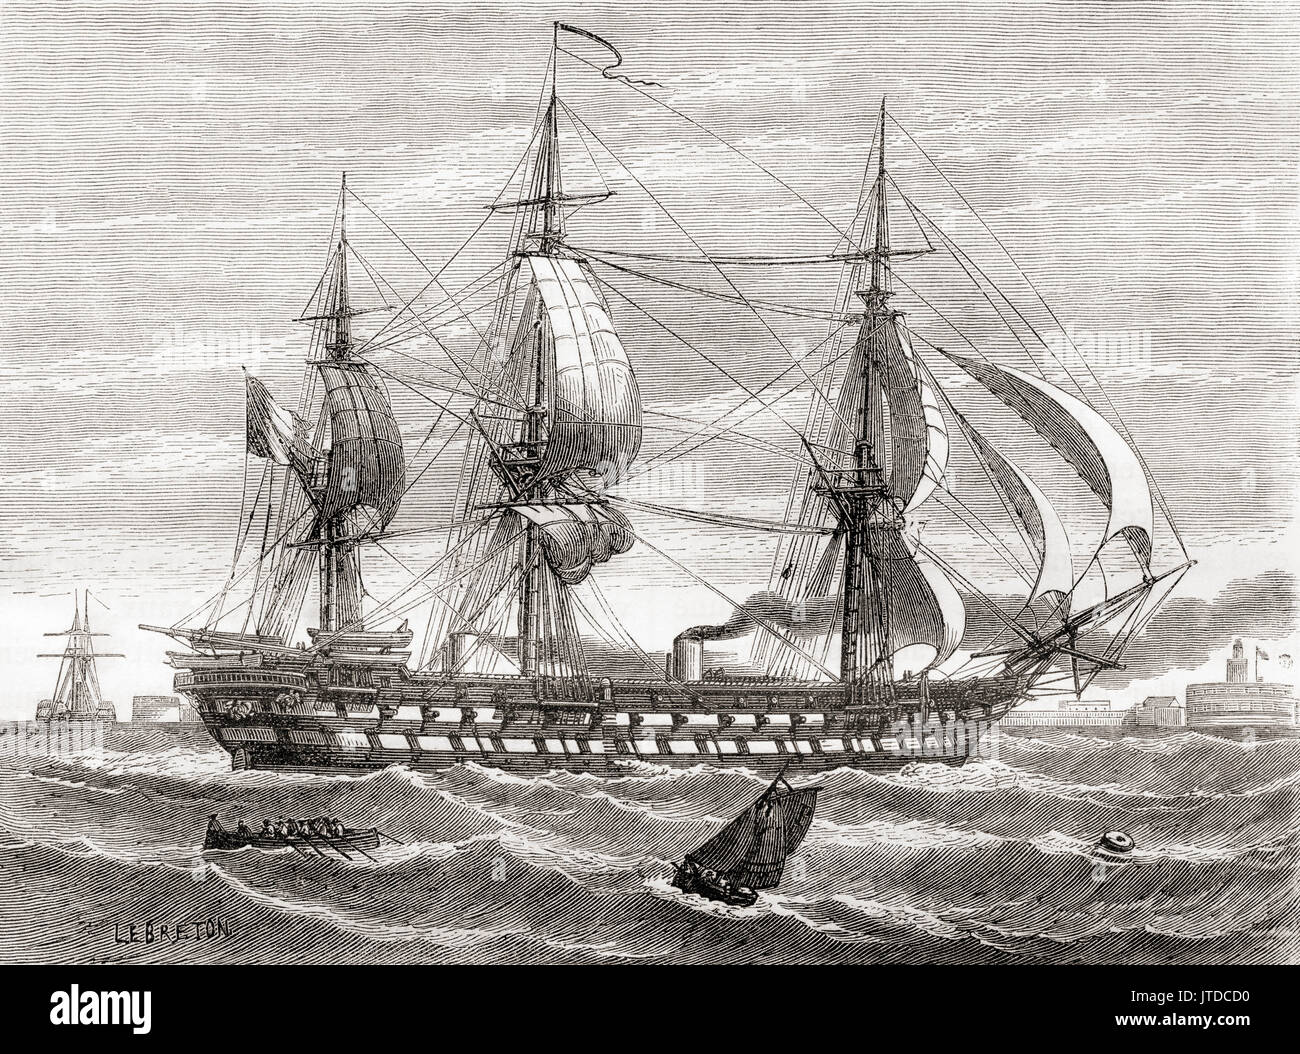 Napoléon, a 90-gun ship of the line of the French Navy, the first purpose-built steam battleship in the world.  From Les Merveilles de la Science, published 1870. Stock Photo